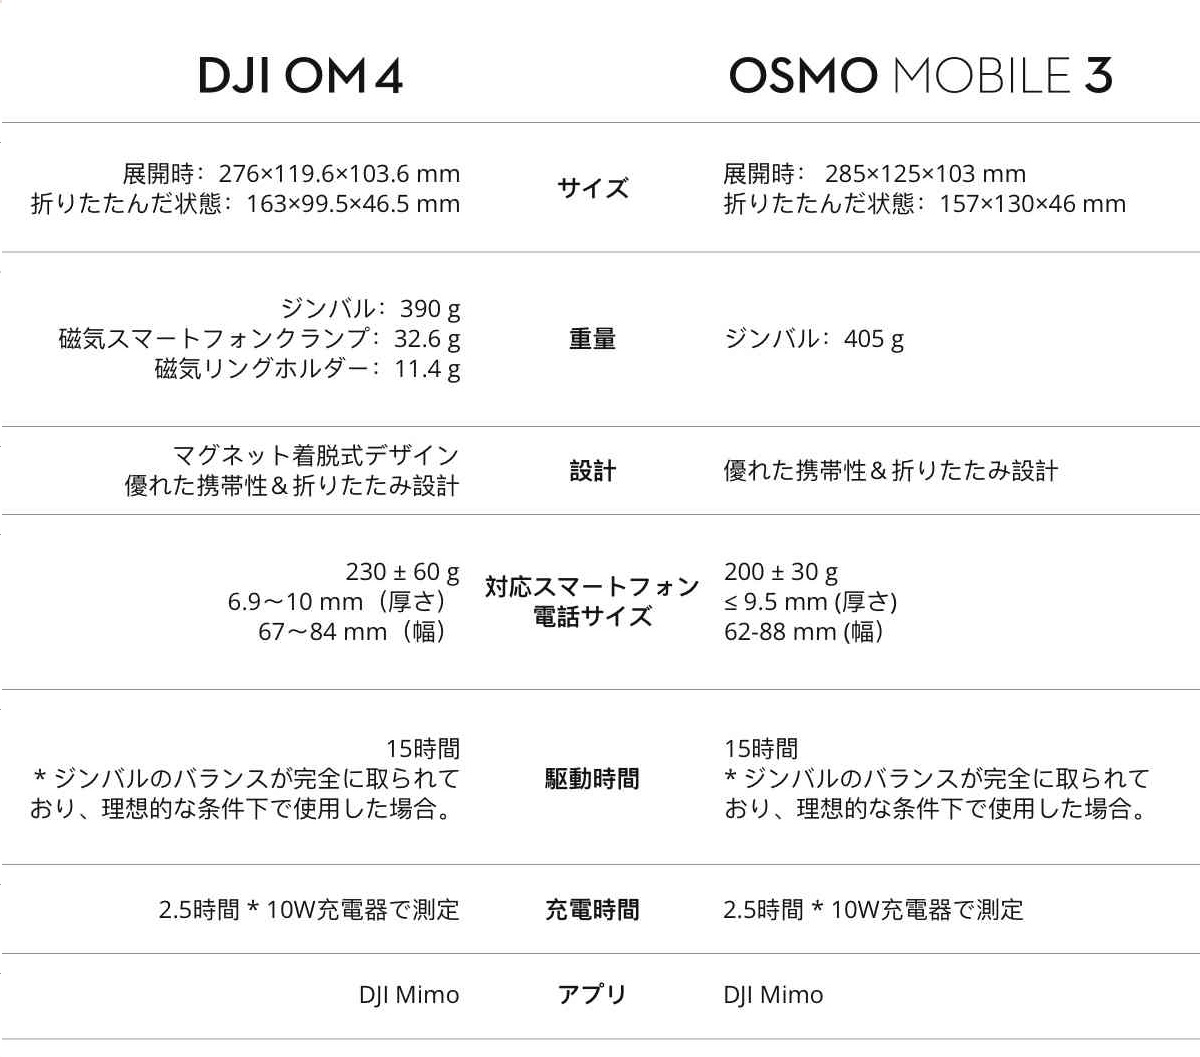 OM 4　Osmo Mobile 3　比較